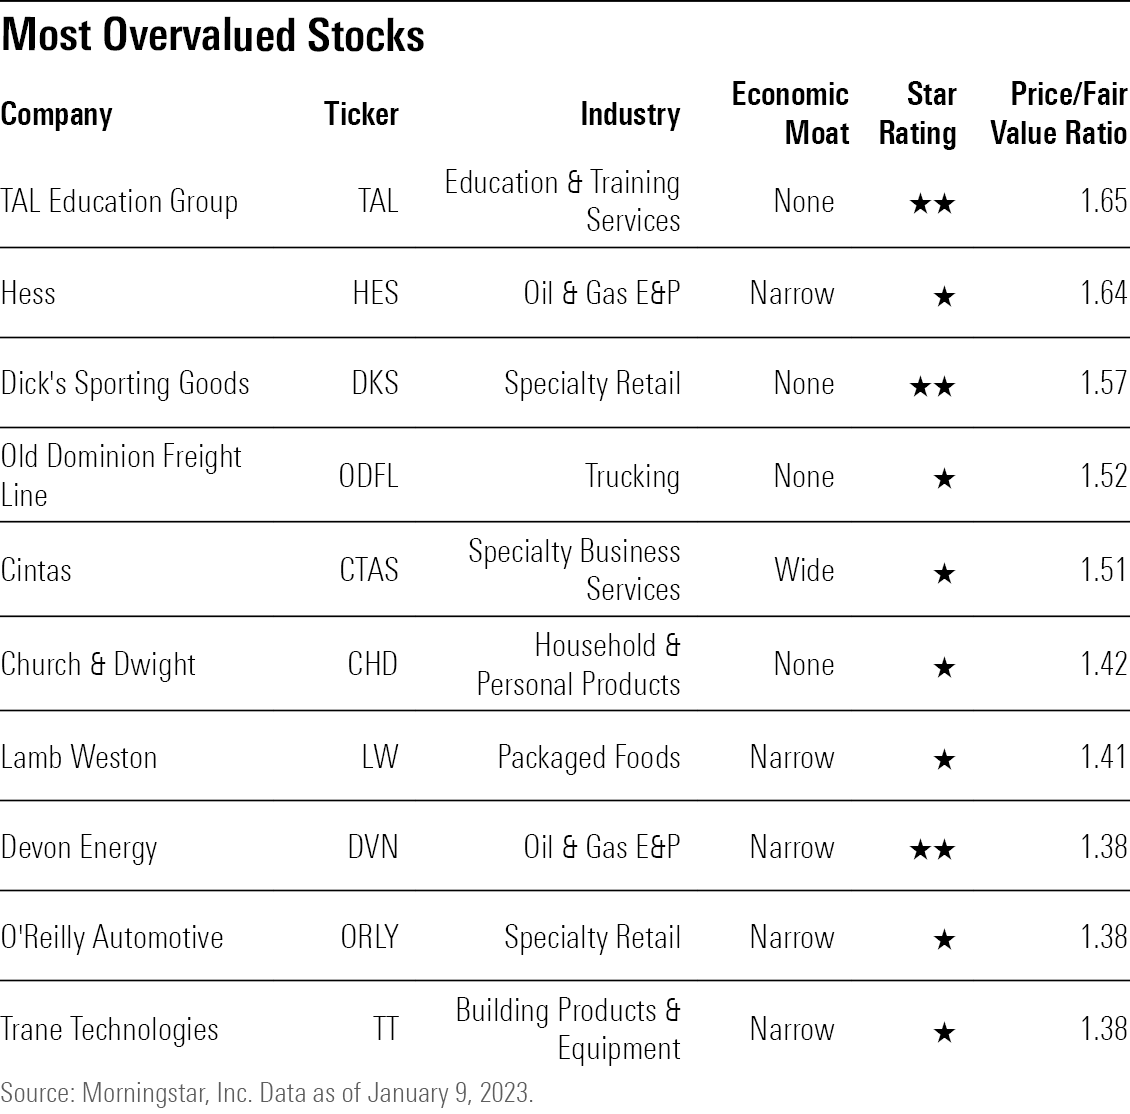 A table showing the ten most overvalued stocks in Morningstar's U.S.-listed coverage list.